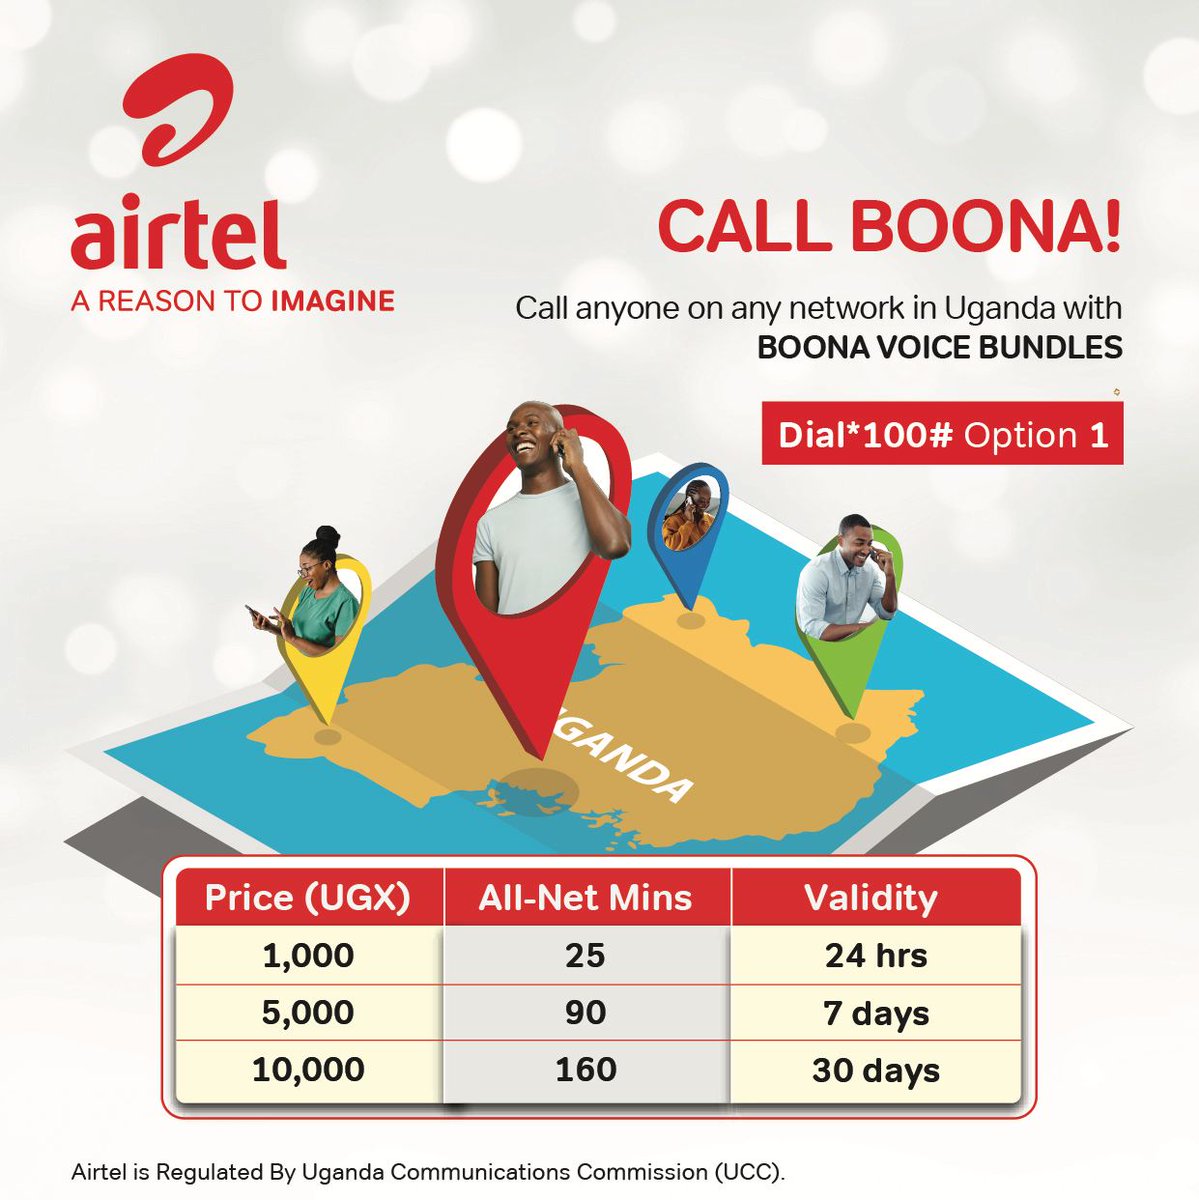 The Airtel Boona bundles allow you to call anyone on any network in Uganda. Dial *100# and choose Option 1 to get yourself a bundle of your choice today
#AReasonToImagine
#CallBoona